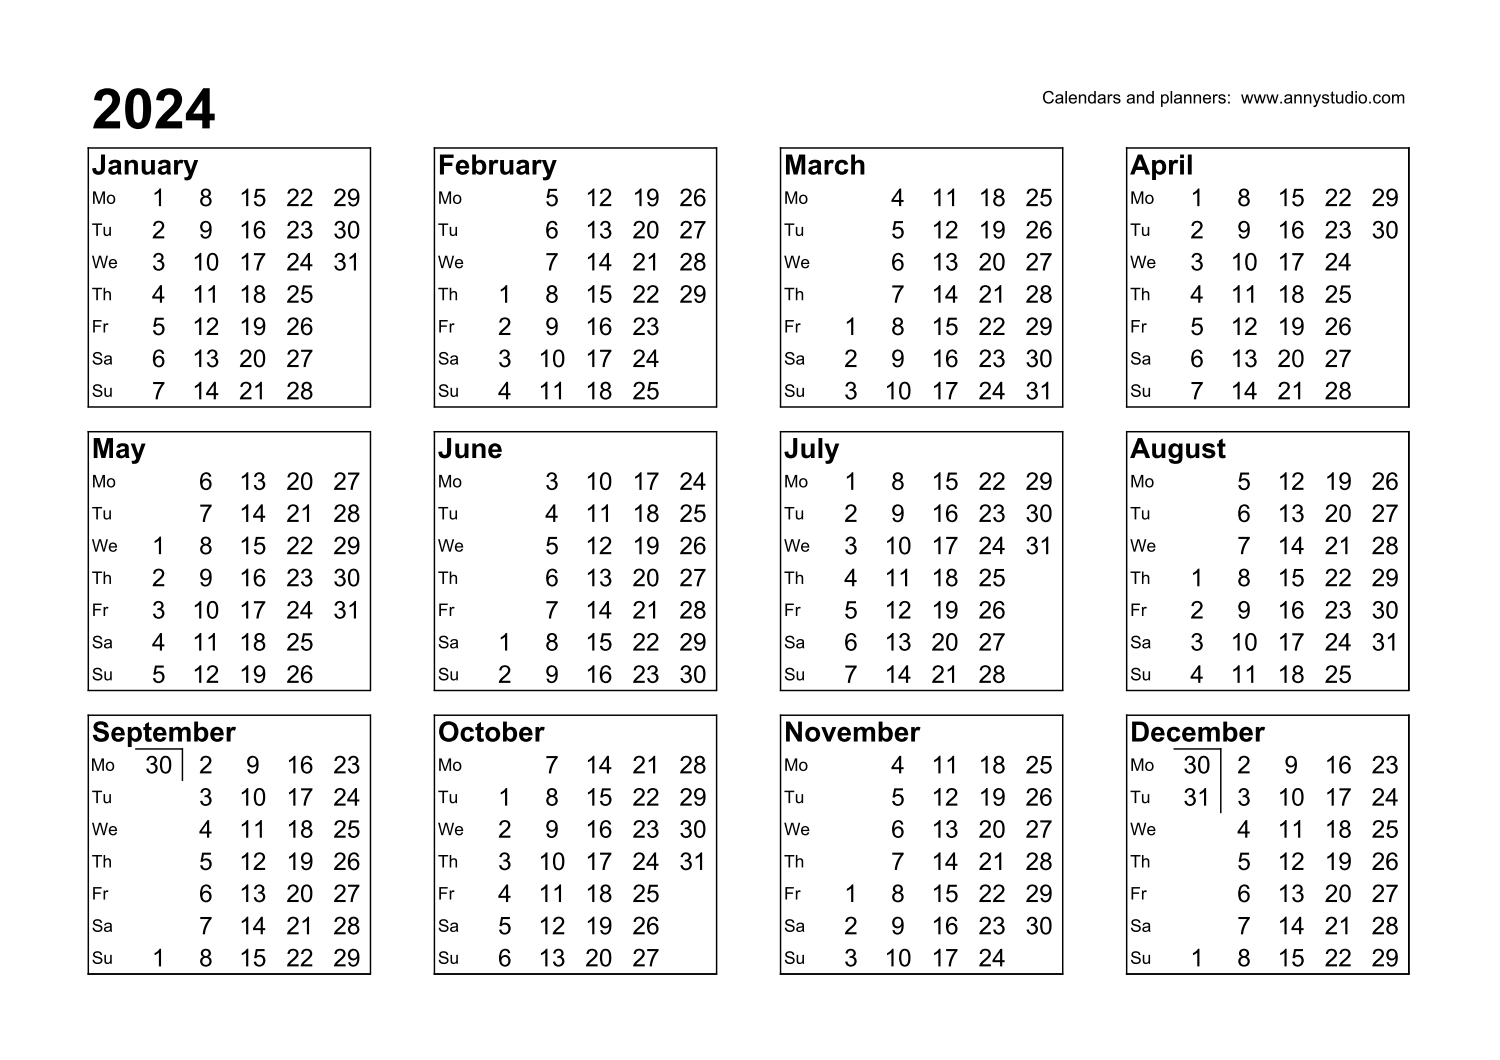 Free Printable Calendars And Planners 2024, 2025 And 2026 | Printable Calendar 2024 South Africa Free Download